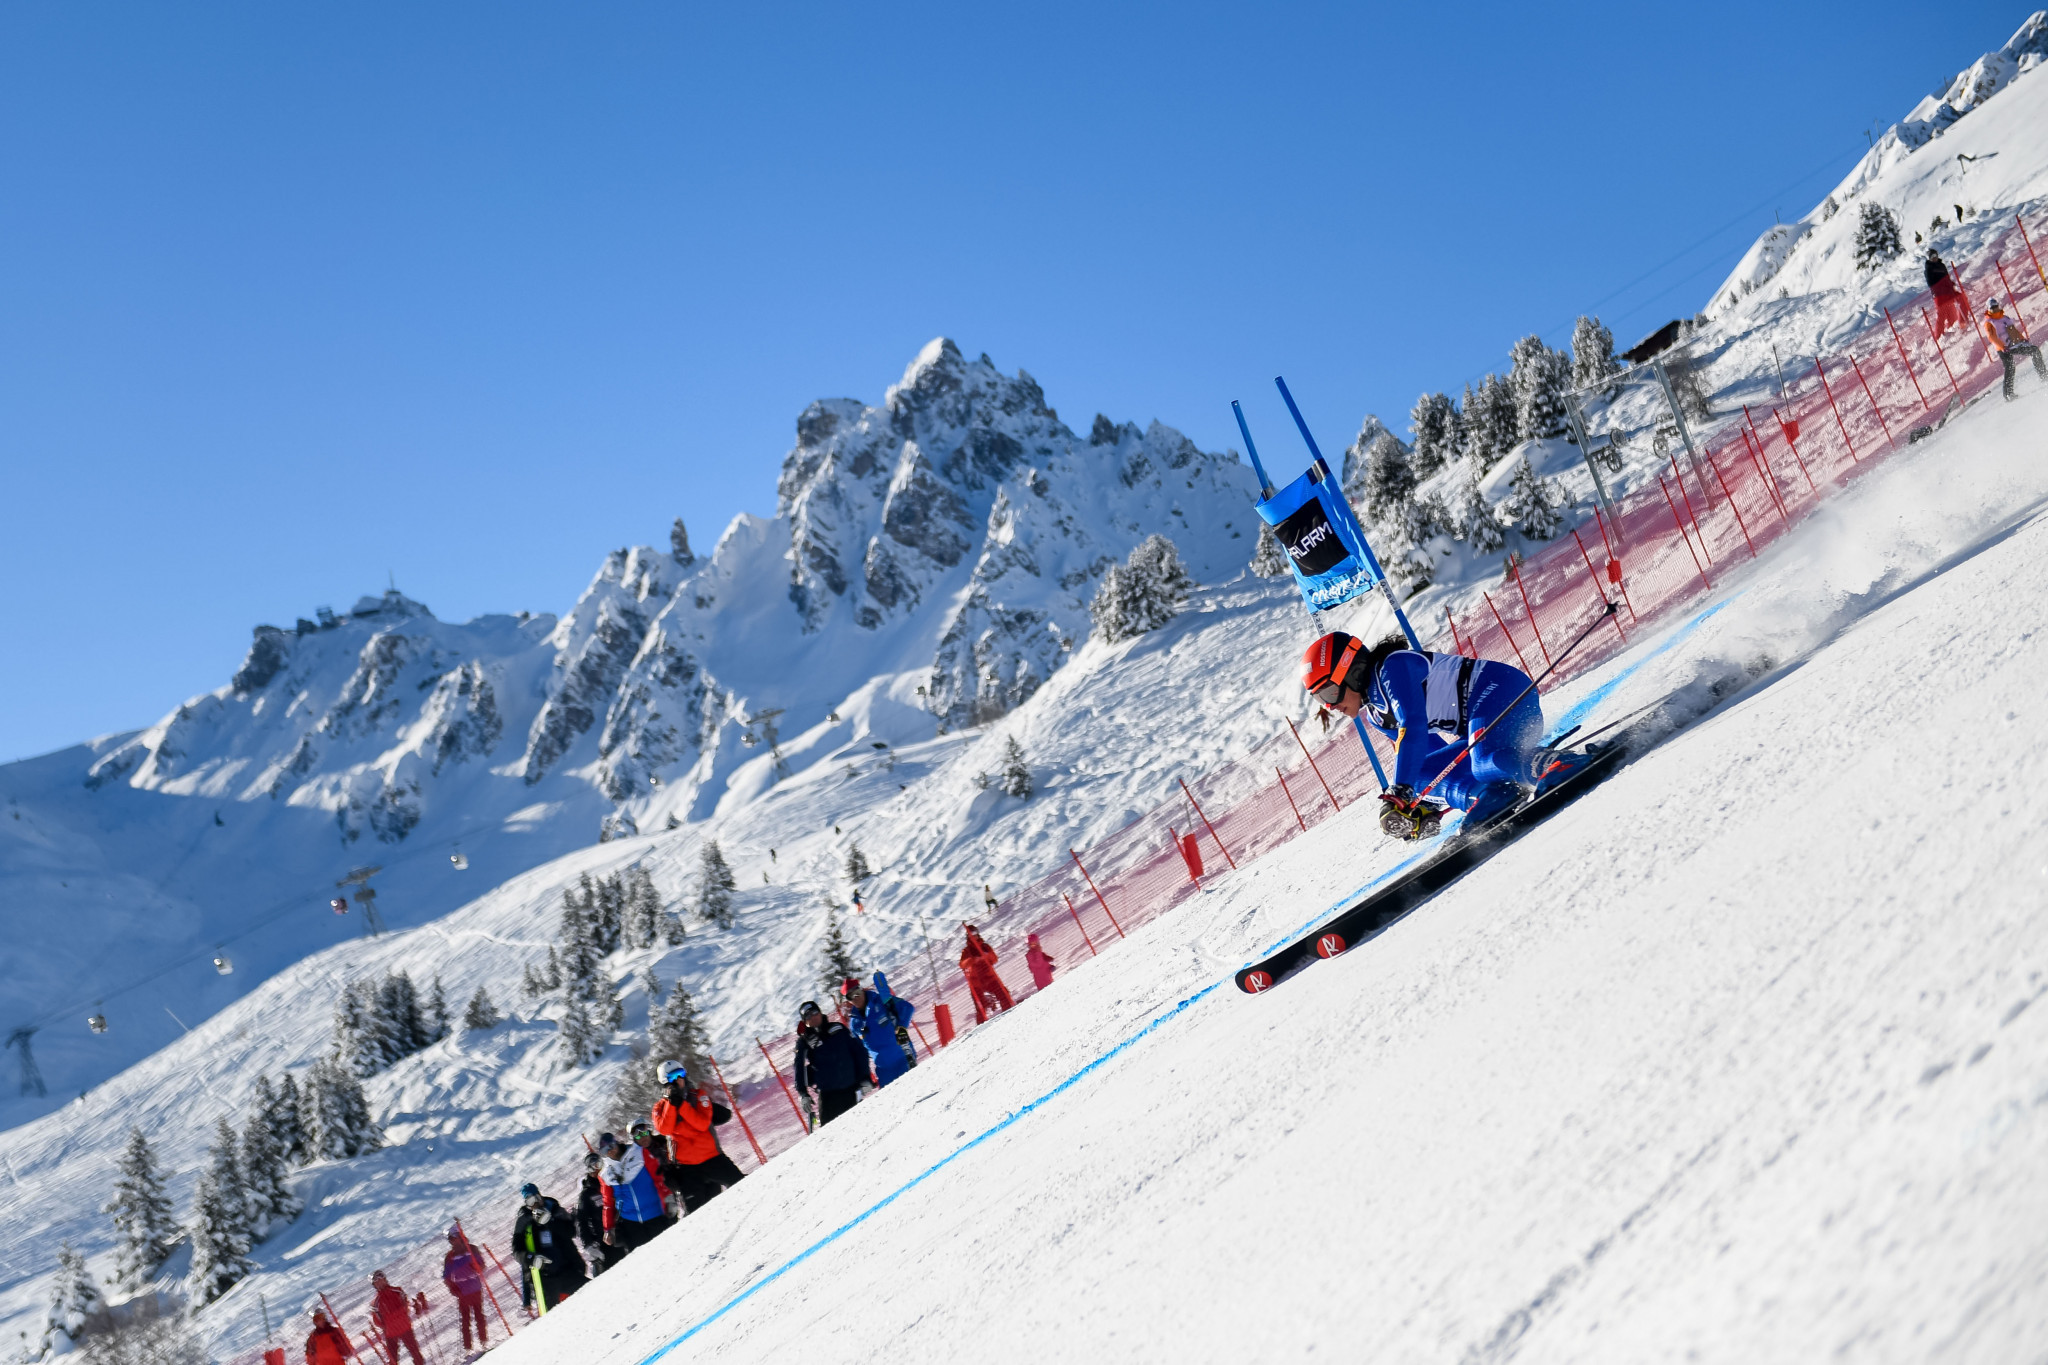 Brignone secures surprise win as Pinturault prevails at FIS Alpine Skiing World Cup